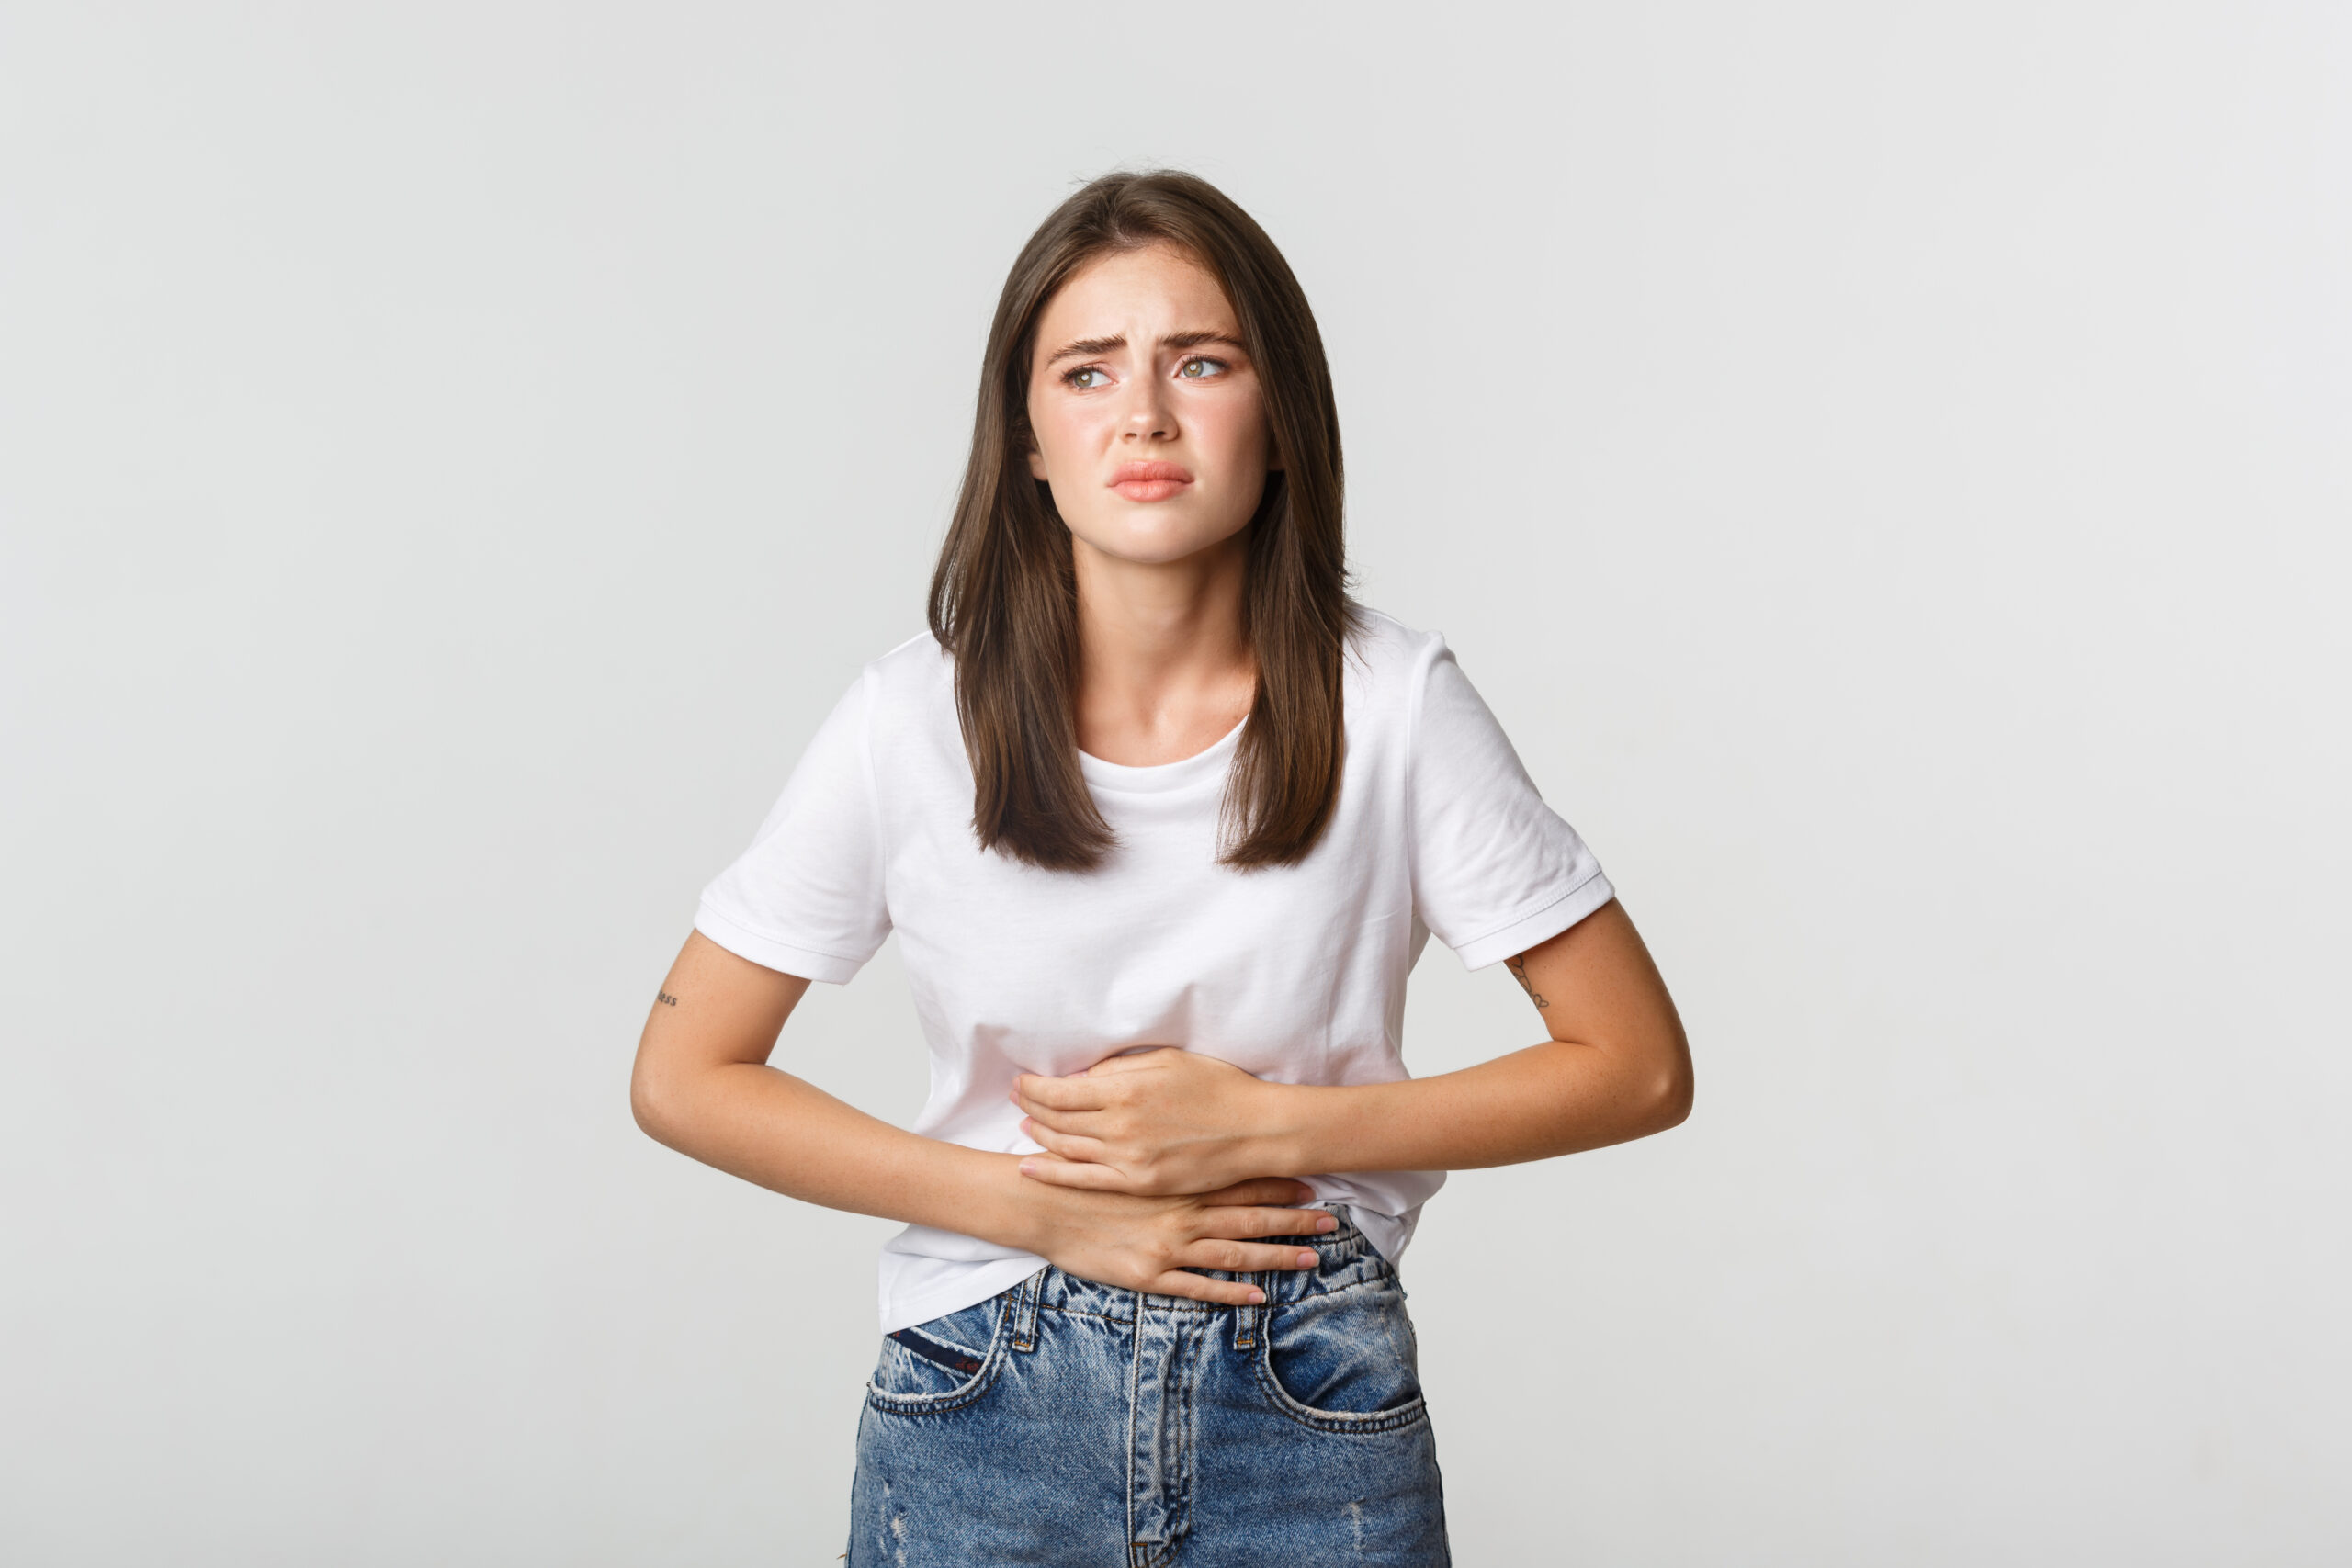 PCOS Symptoms Quiz: PCOS, polycystic ovary syndrome, symptoms, irregular periods, excess hair growth, acne, weight gain, hair loss, darkening of the skin, fatigue, mood change,